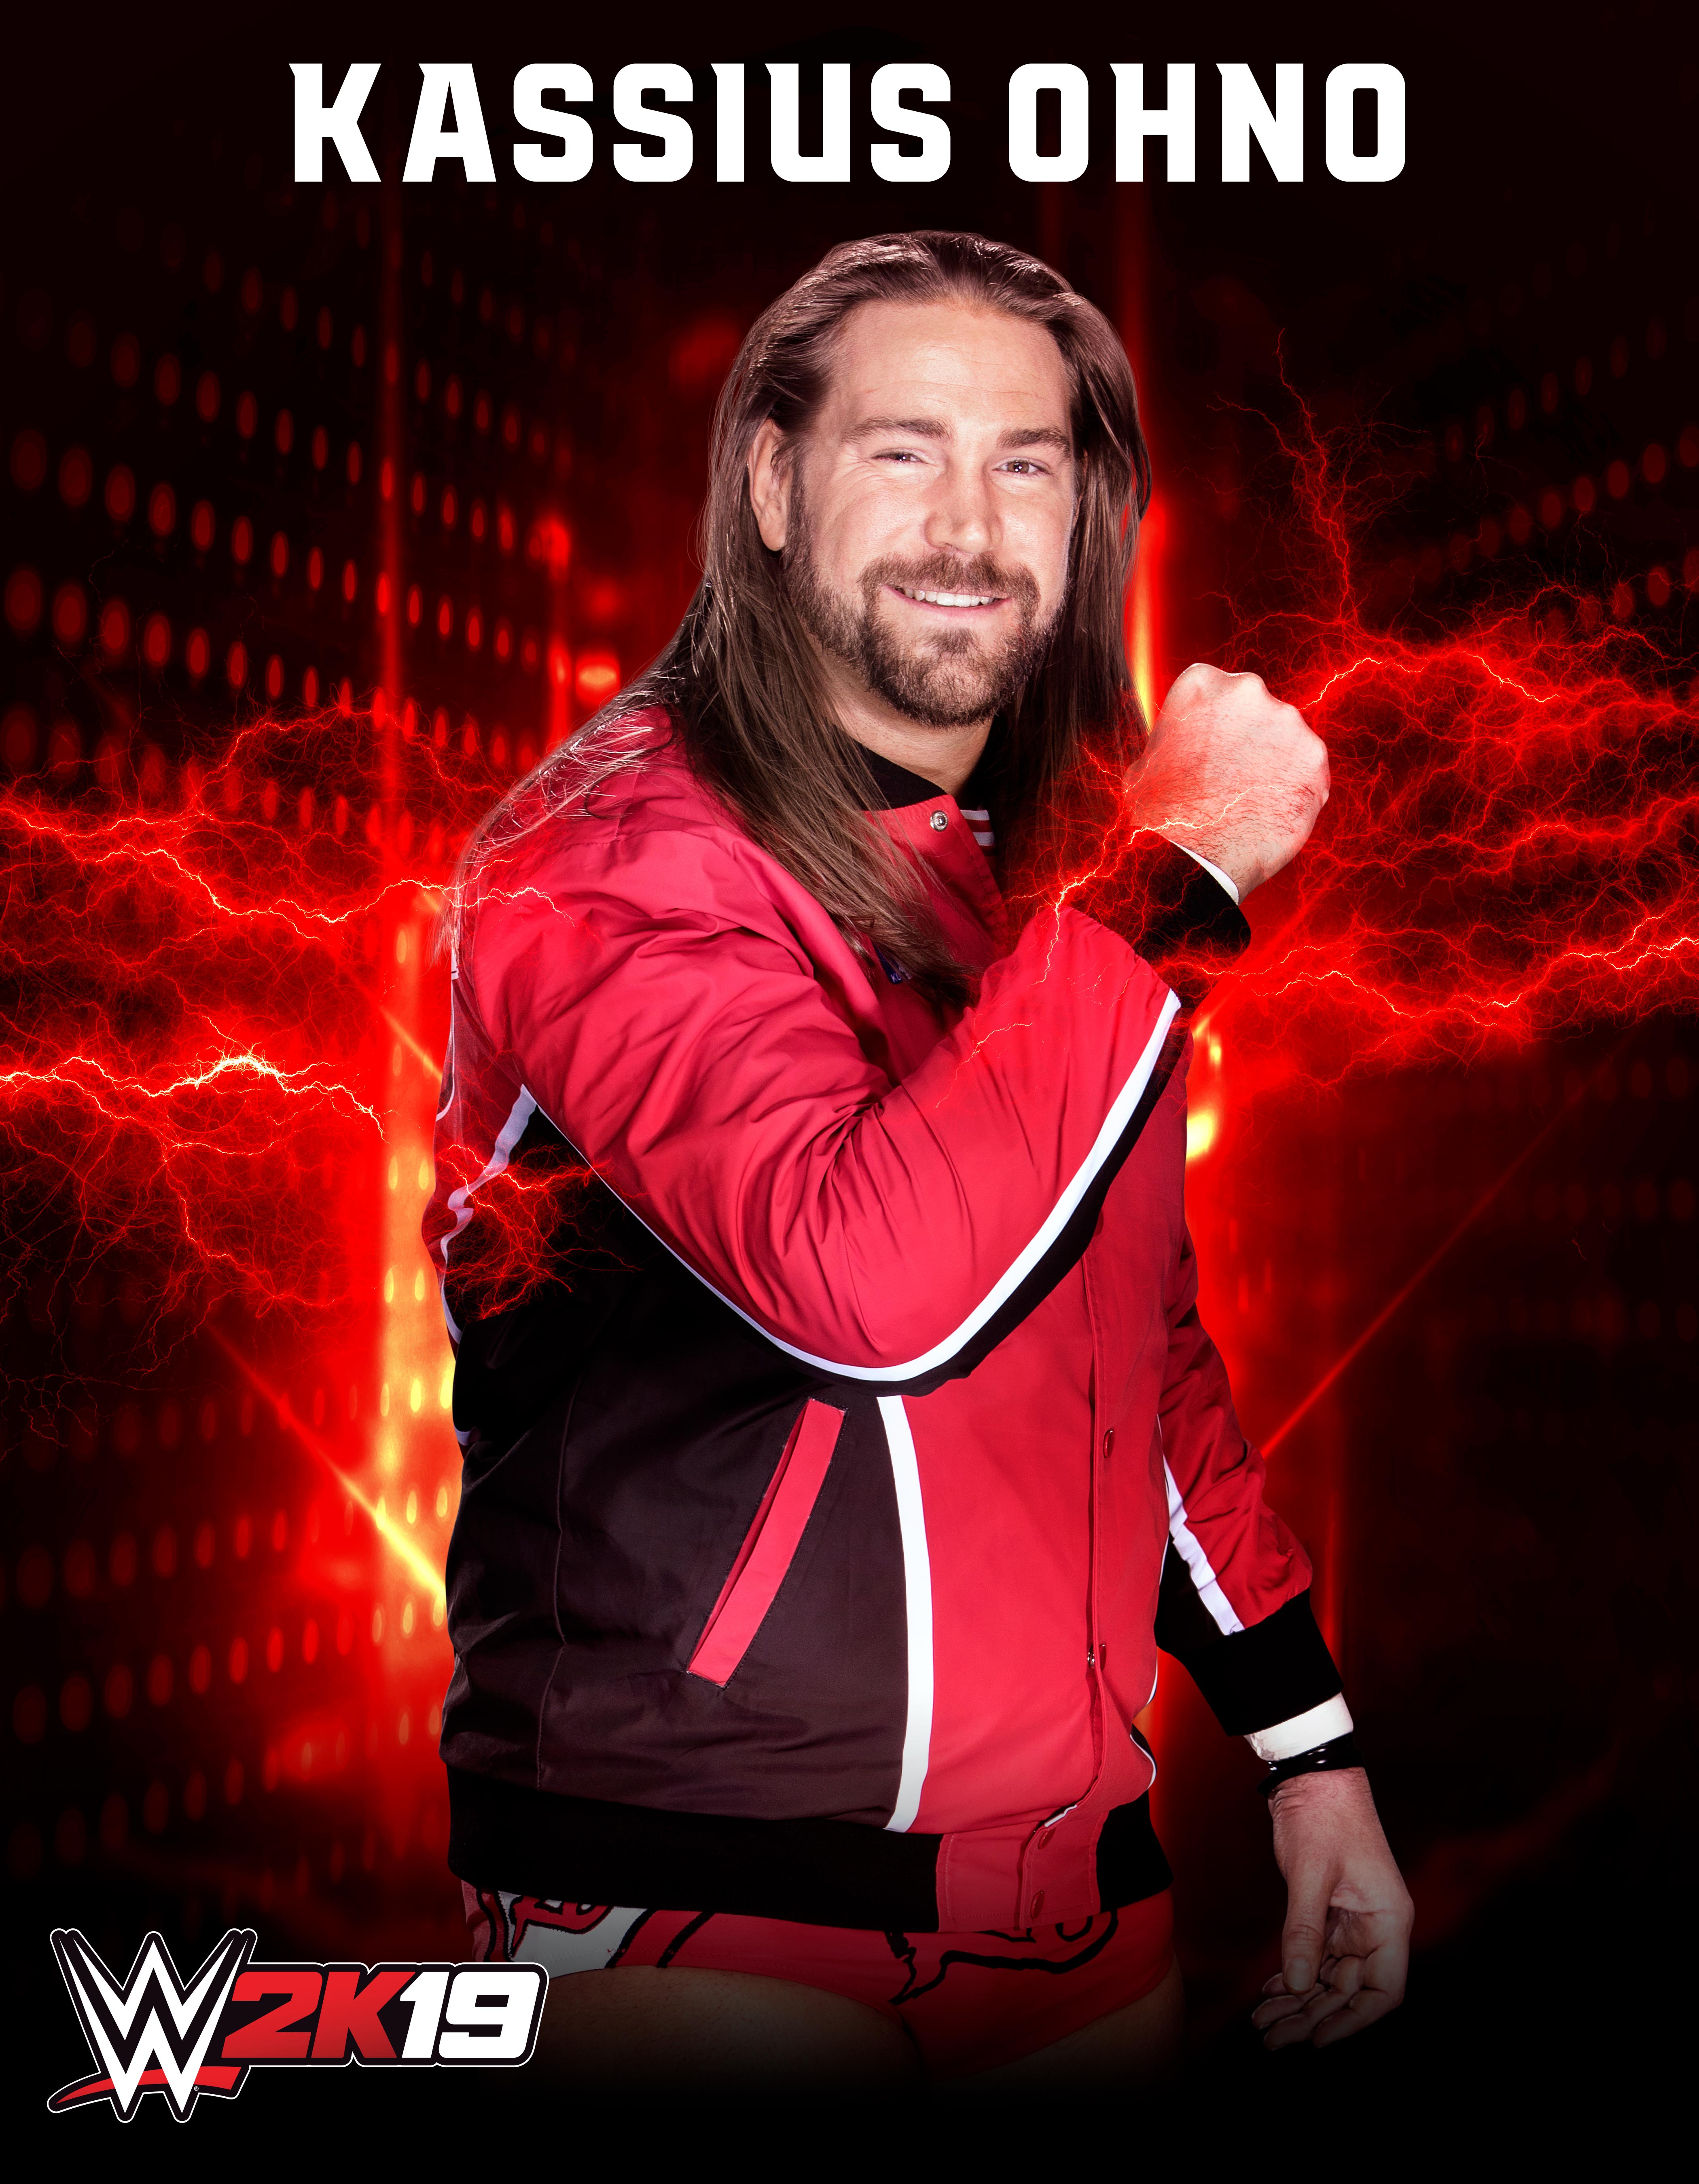 Wwe2k19 Roster Kassius Ohno